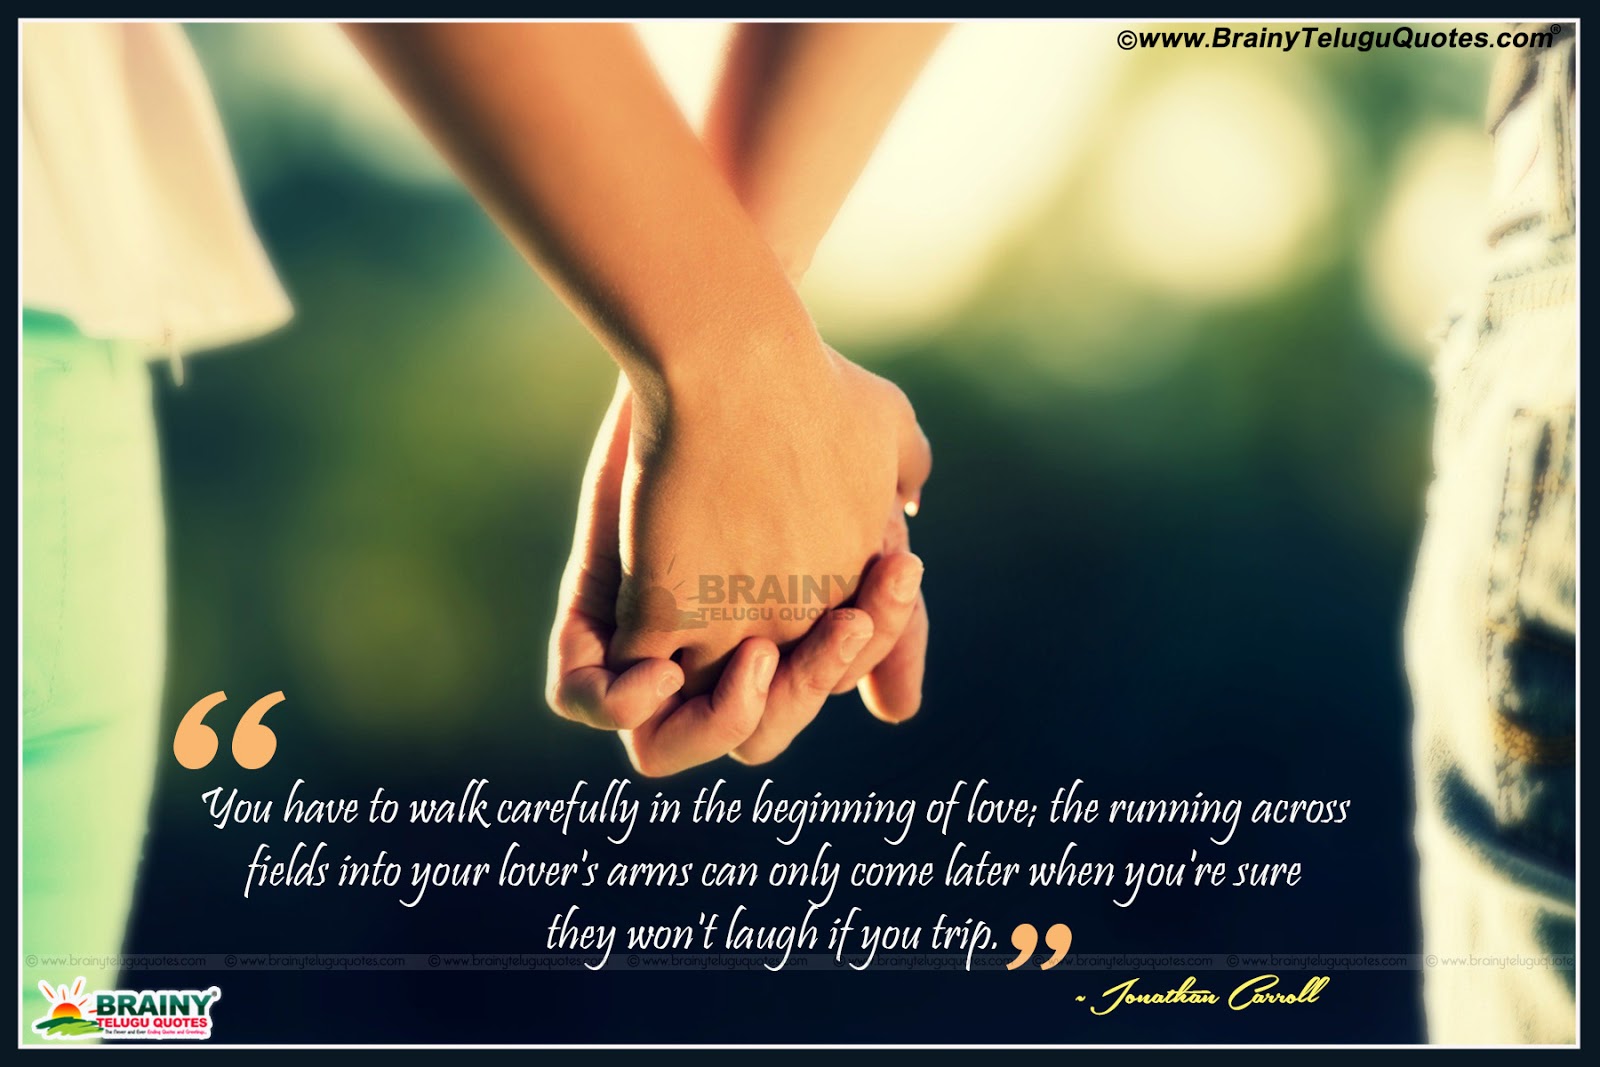 Love Quotes In Text How To Write Love Sms & Romantic Short Messages